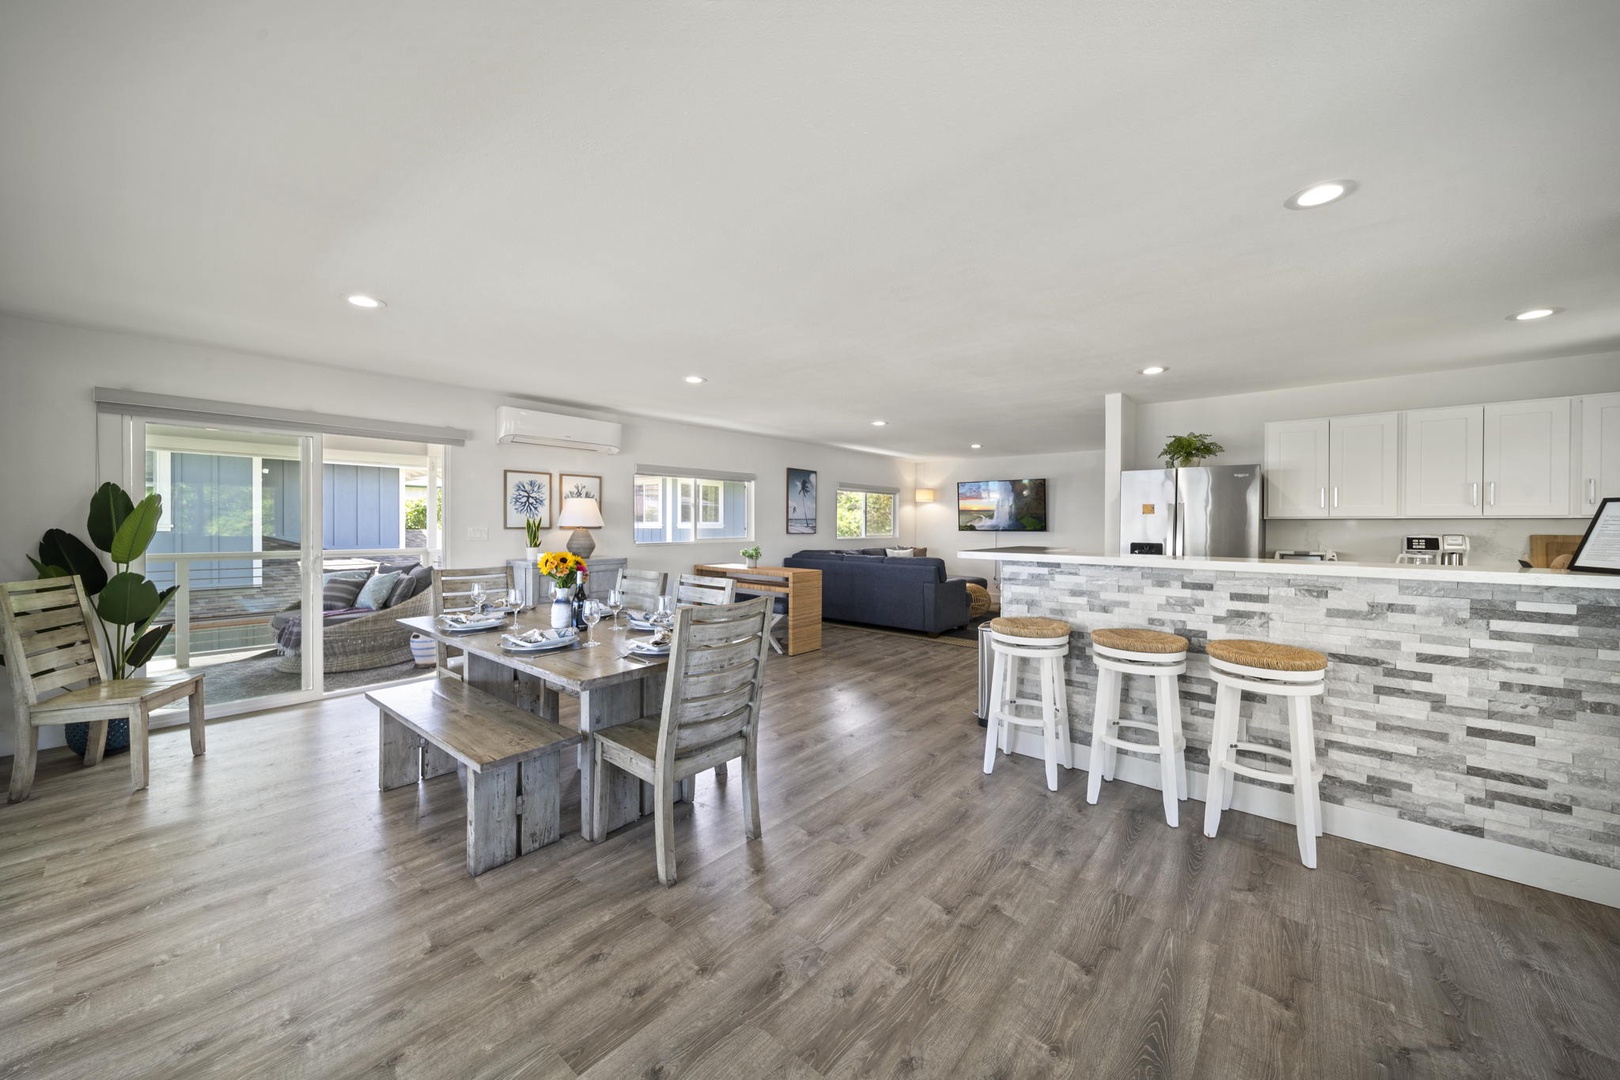 Haleiwa Vacation Rentals, Hale Nalu - The open-concept living space offers the perfect space for socializing and entertaining